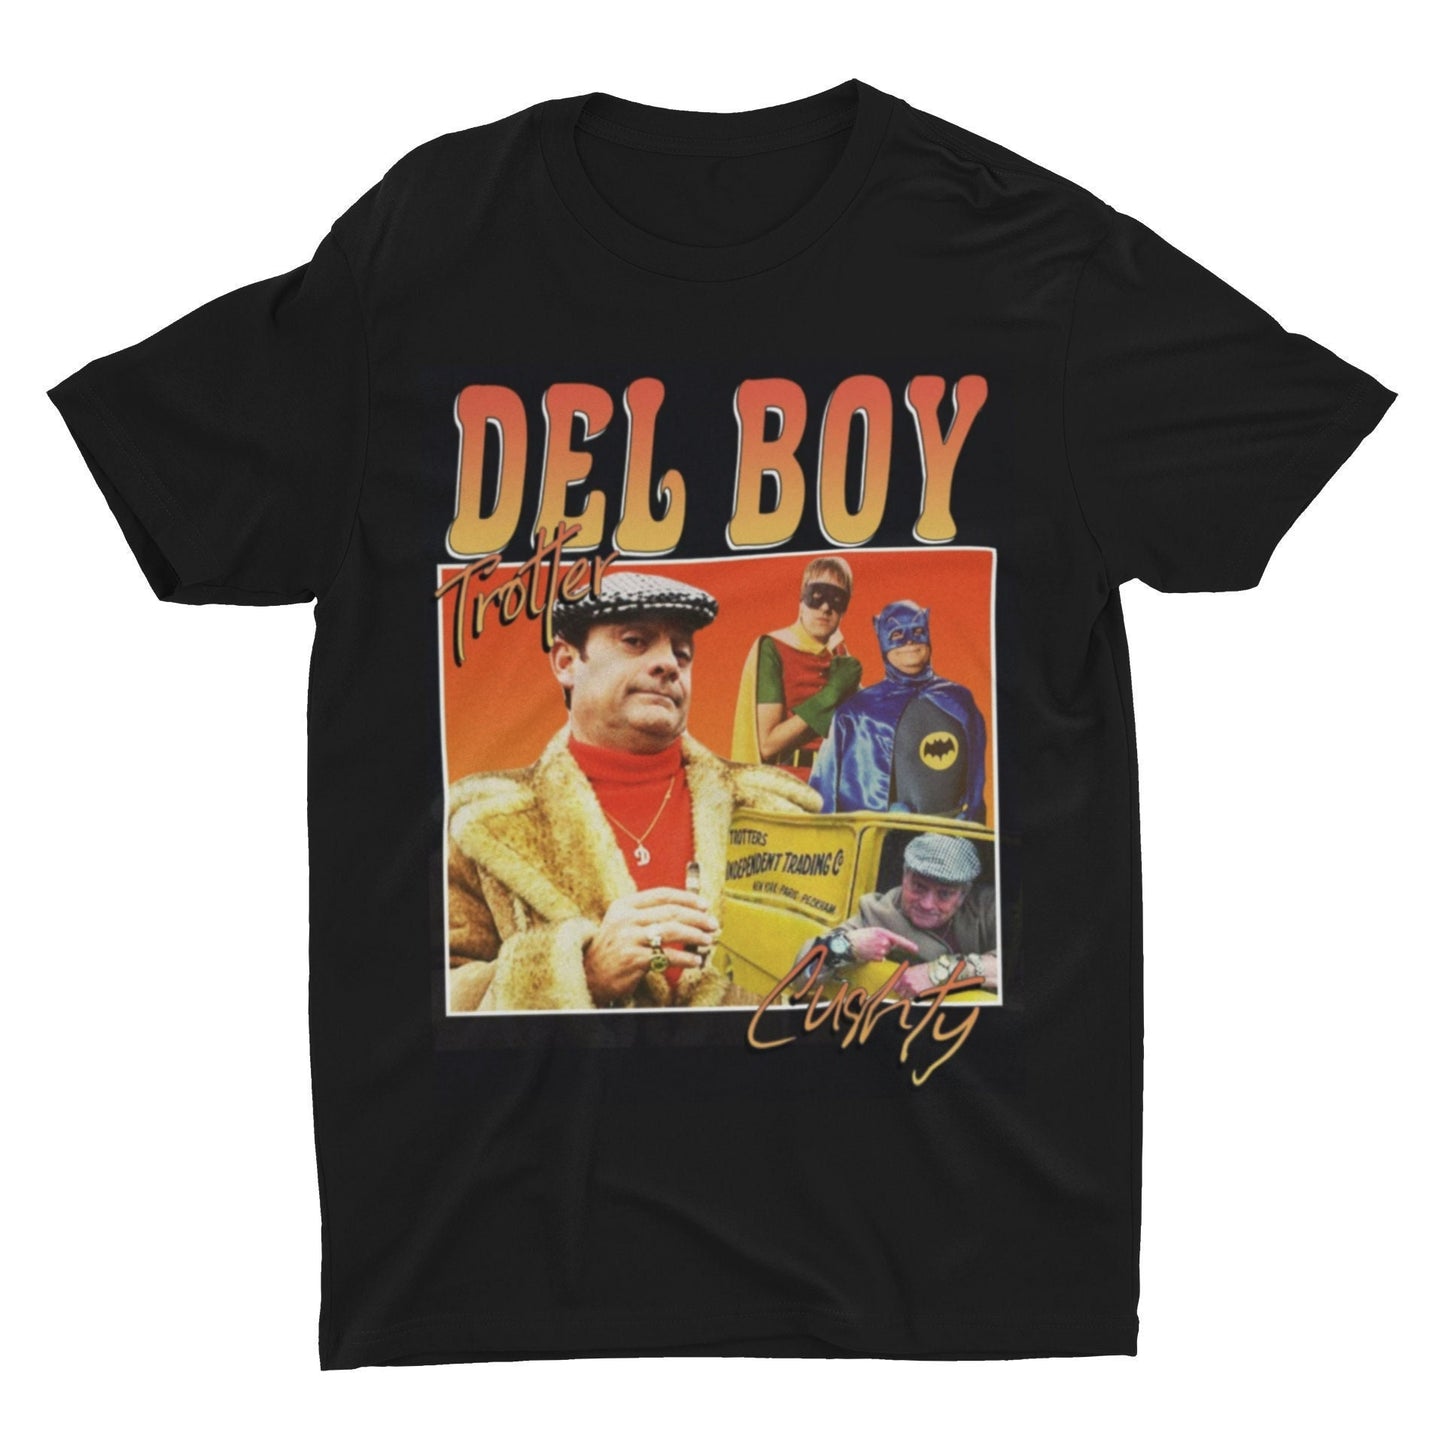 Del Boy Homage T Shirt | Only Fools & Horses T Shirt | Trotters Independent Trading Co. | Only Fools and Horses Gift